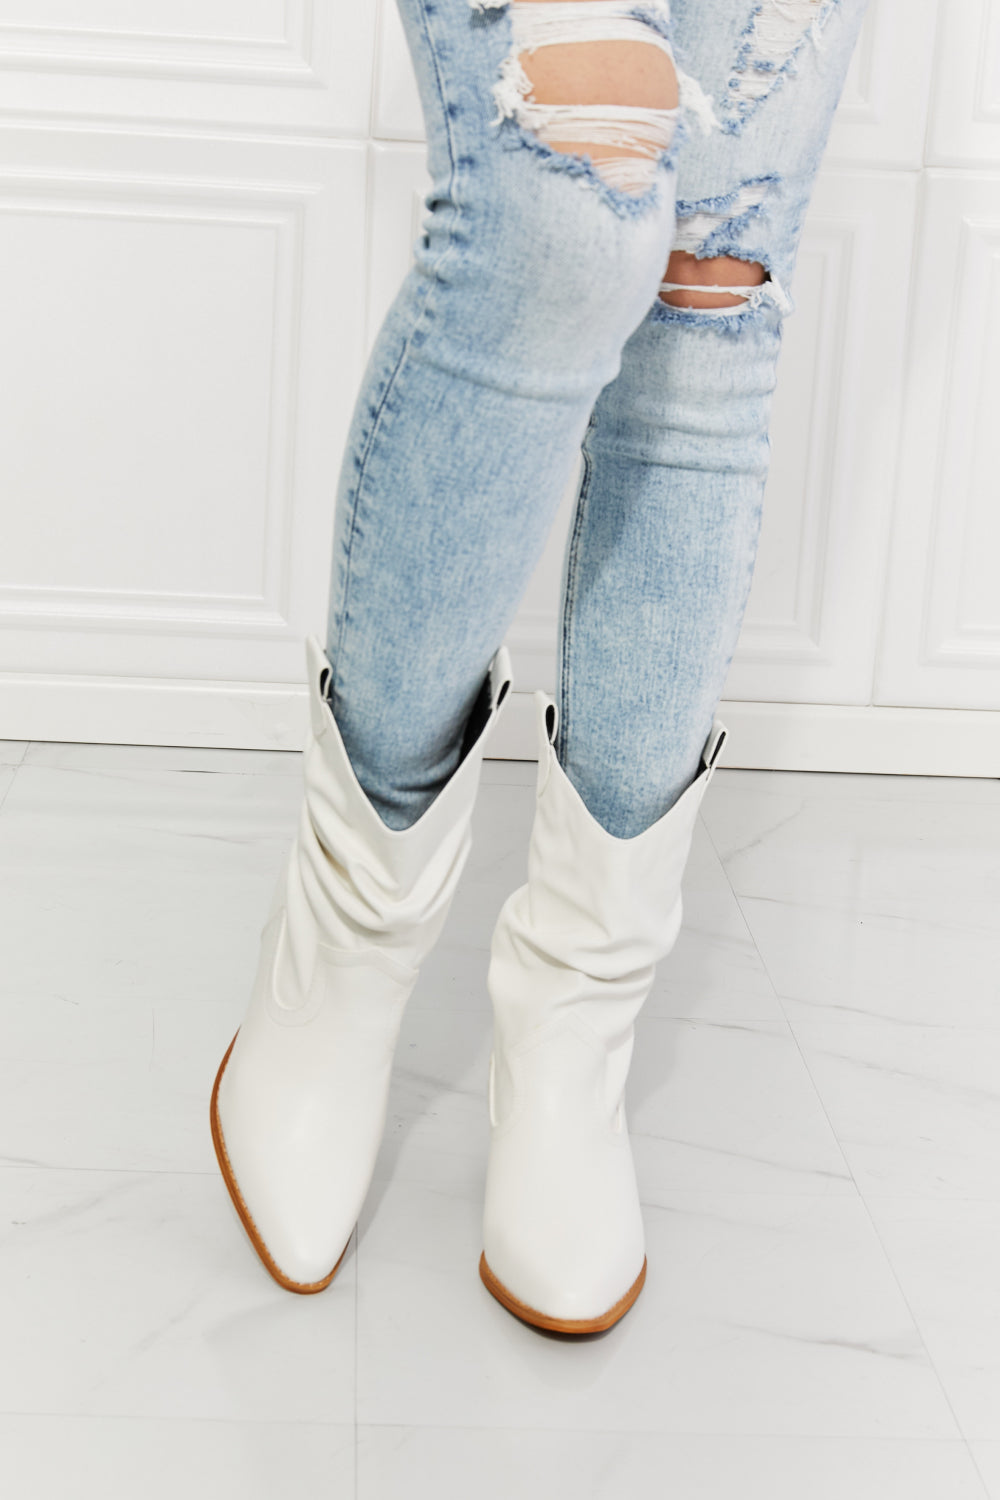 MMShoes Better in Texas Scrunch Cowboy Boots in White - BEAUTY COSMOTICS SHOP